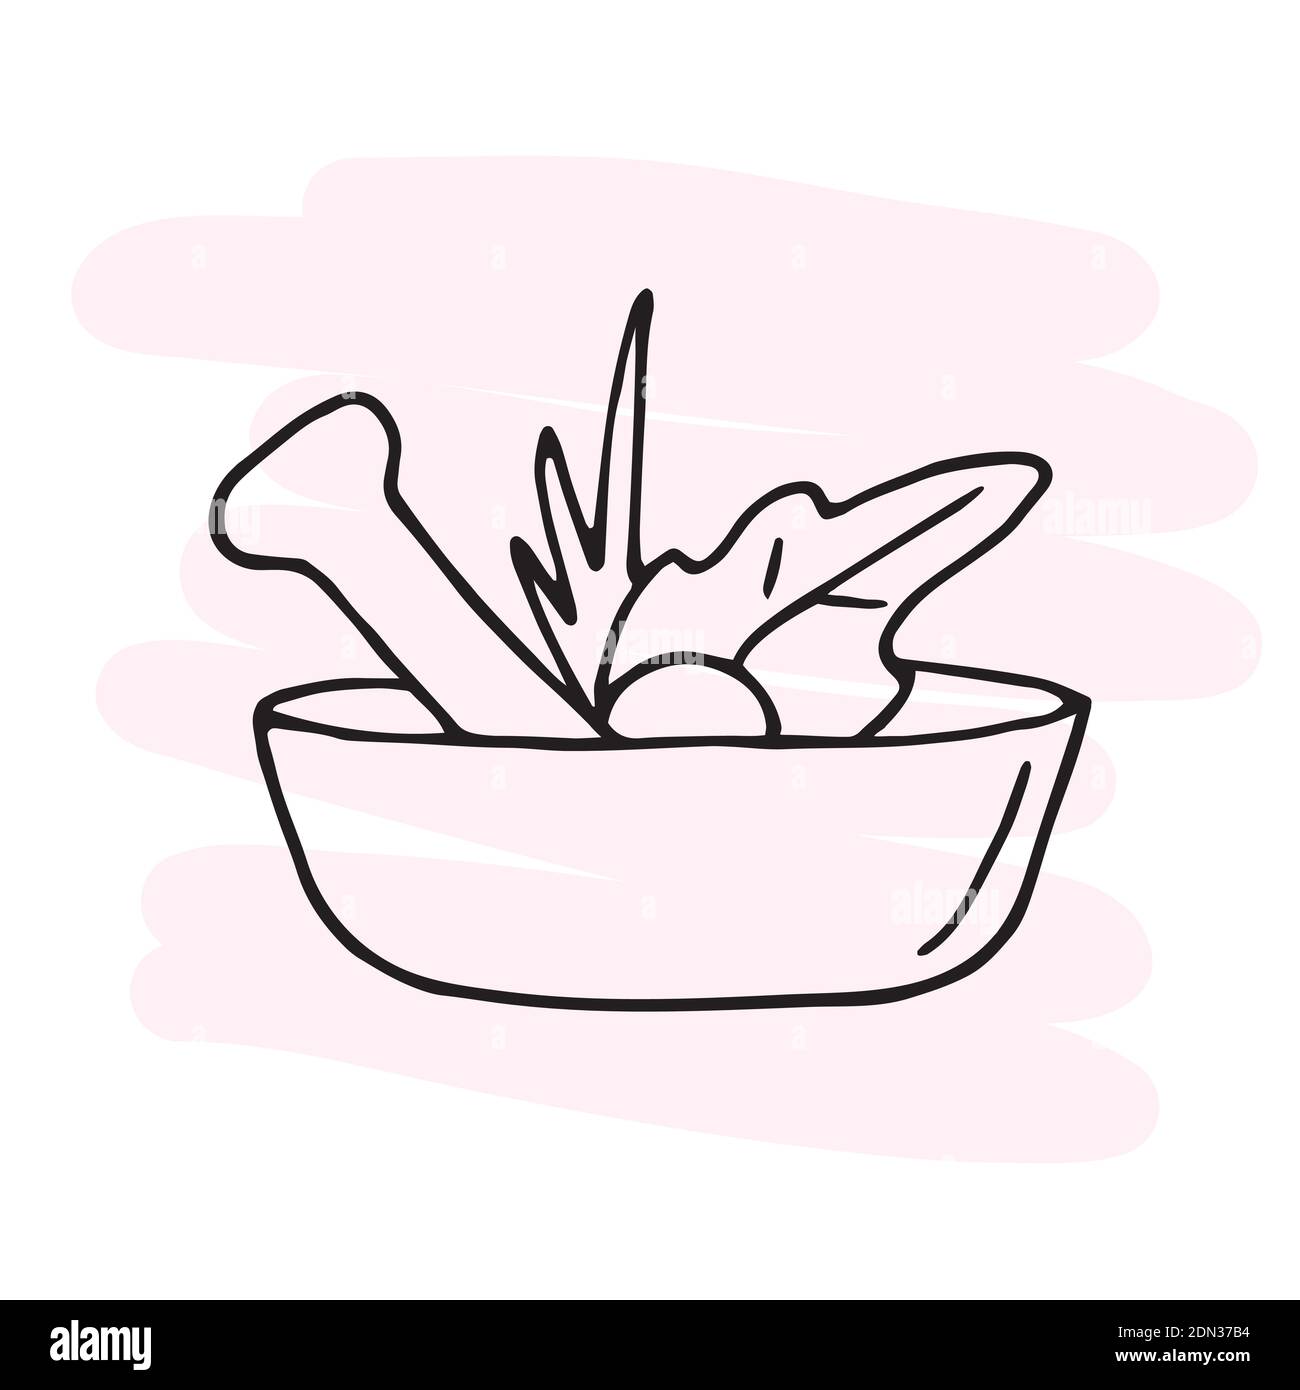 mortar with pestle for grinding ingredients. Attributes of alternative medicine. Doodle Stock Vector